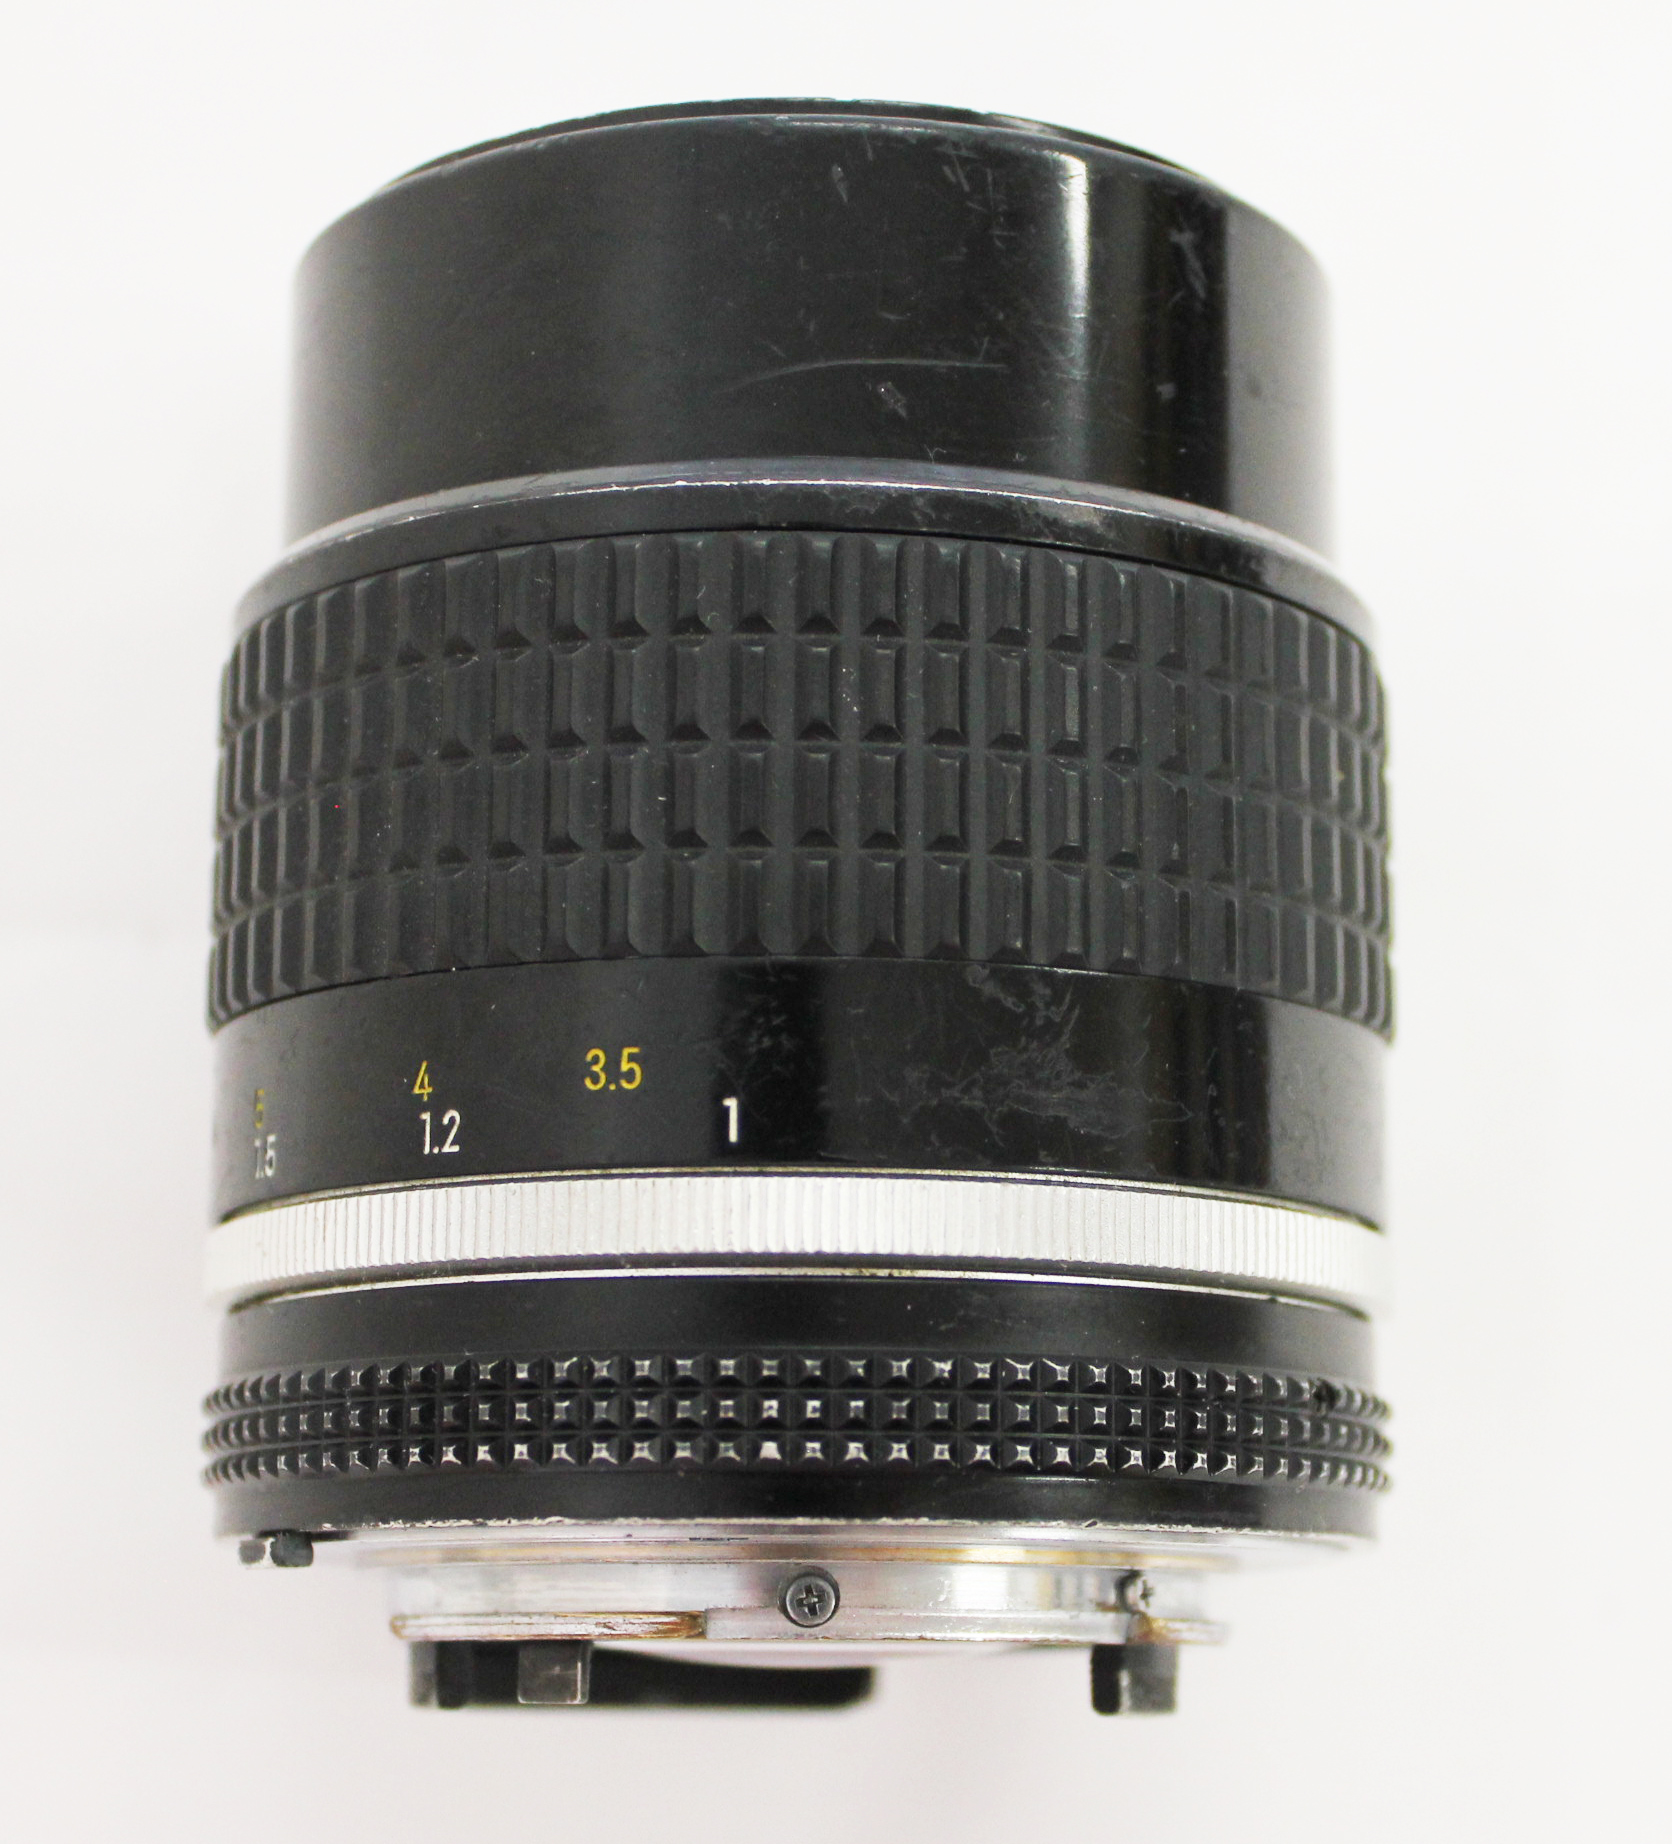  Nikon Nikkor Ai-s AIS 105mm F/2.5 Lens for F Mount SLR from Japan Photo 4